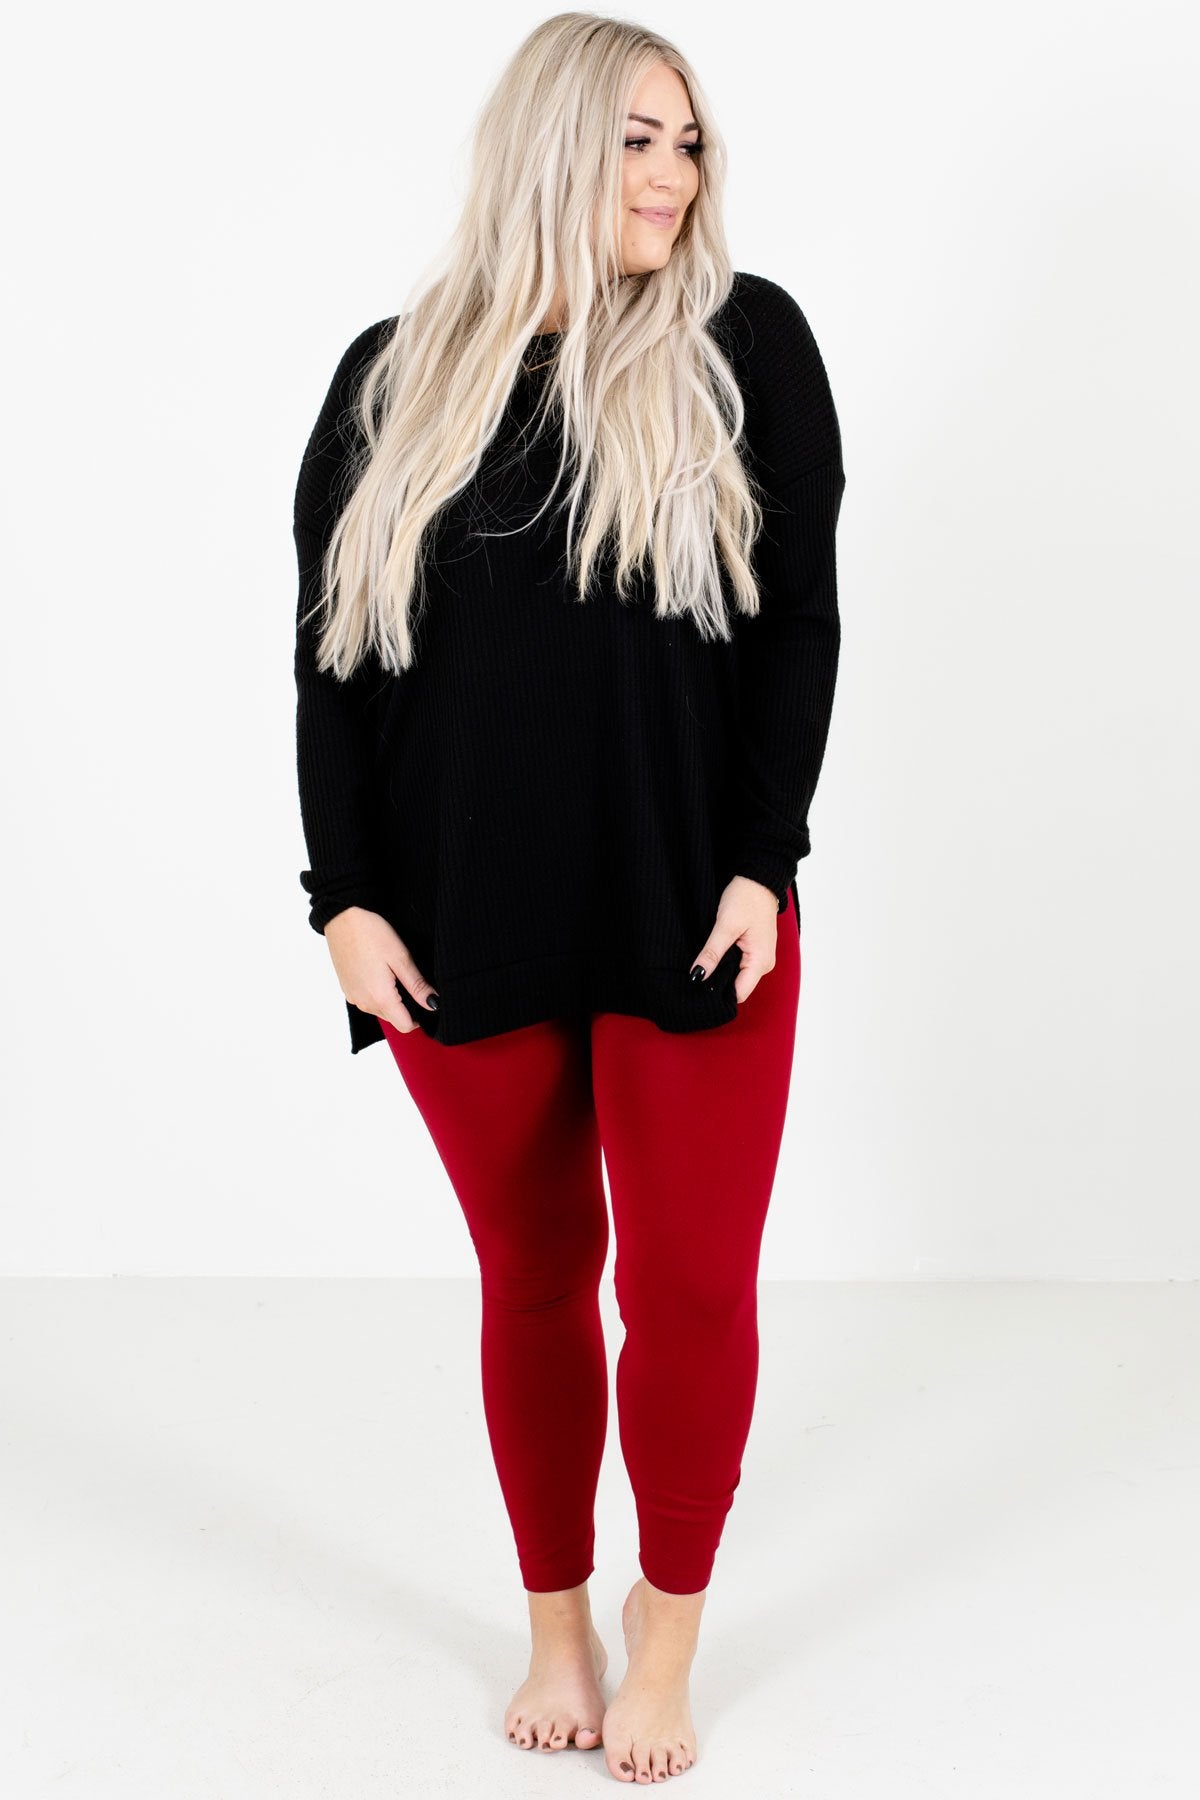 Women's Red Warm and Cozy Boutique Leggings